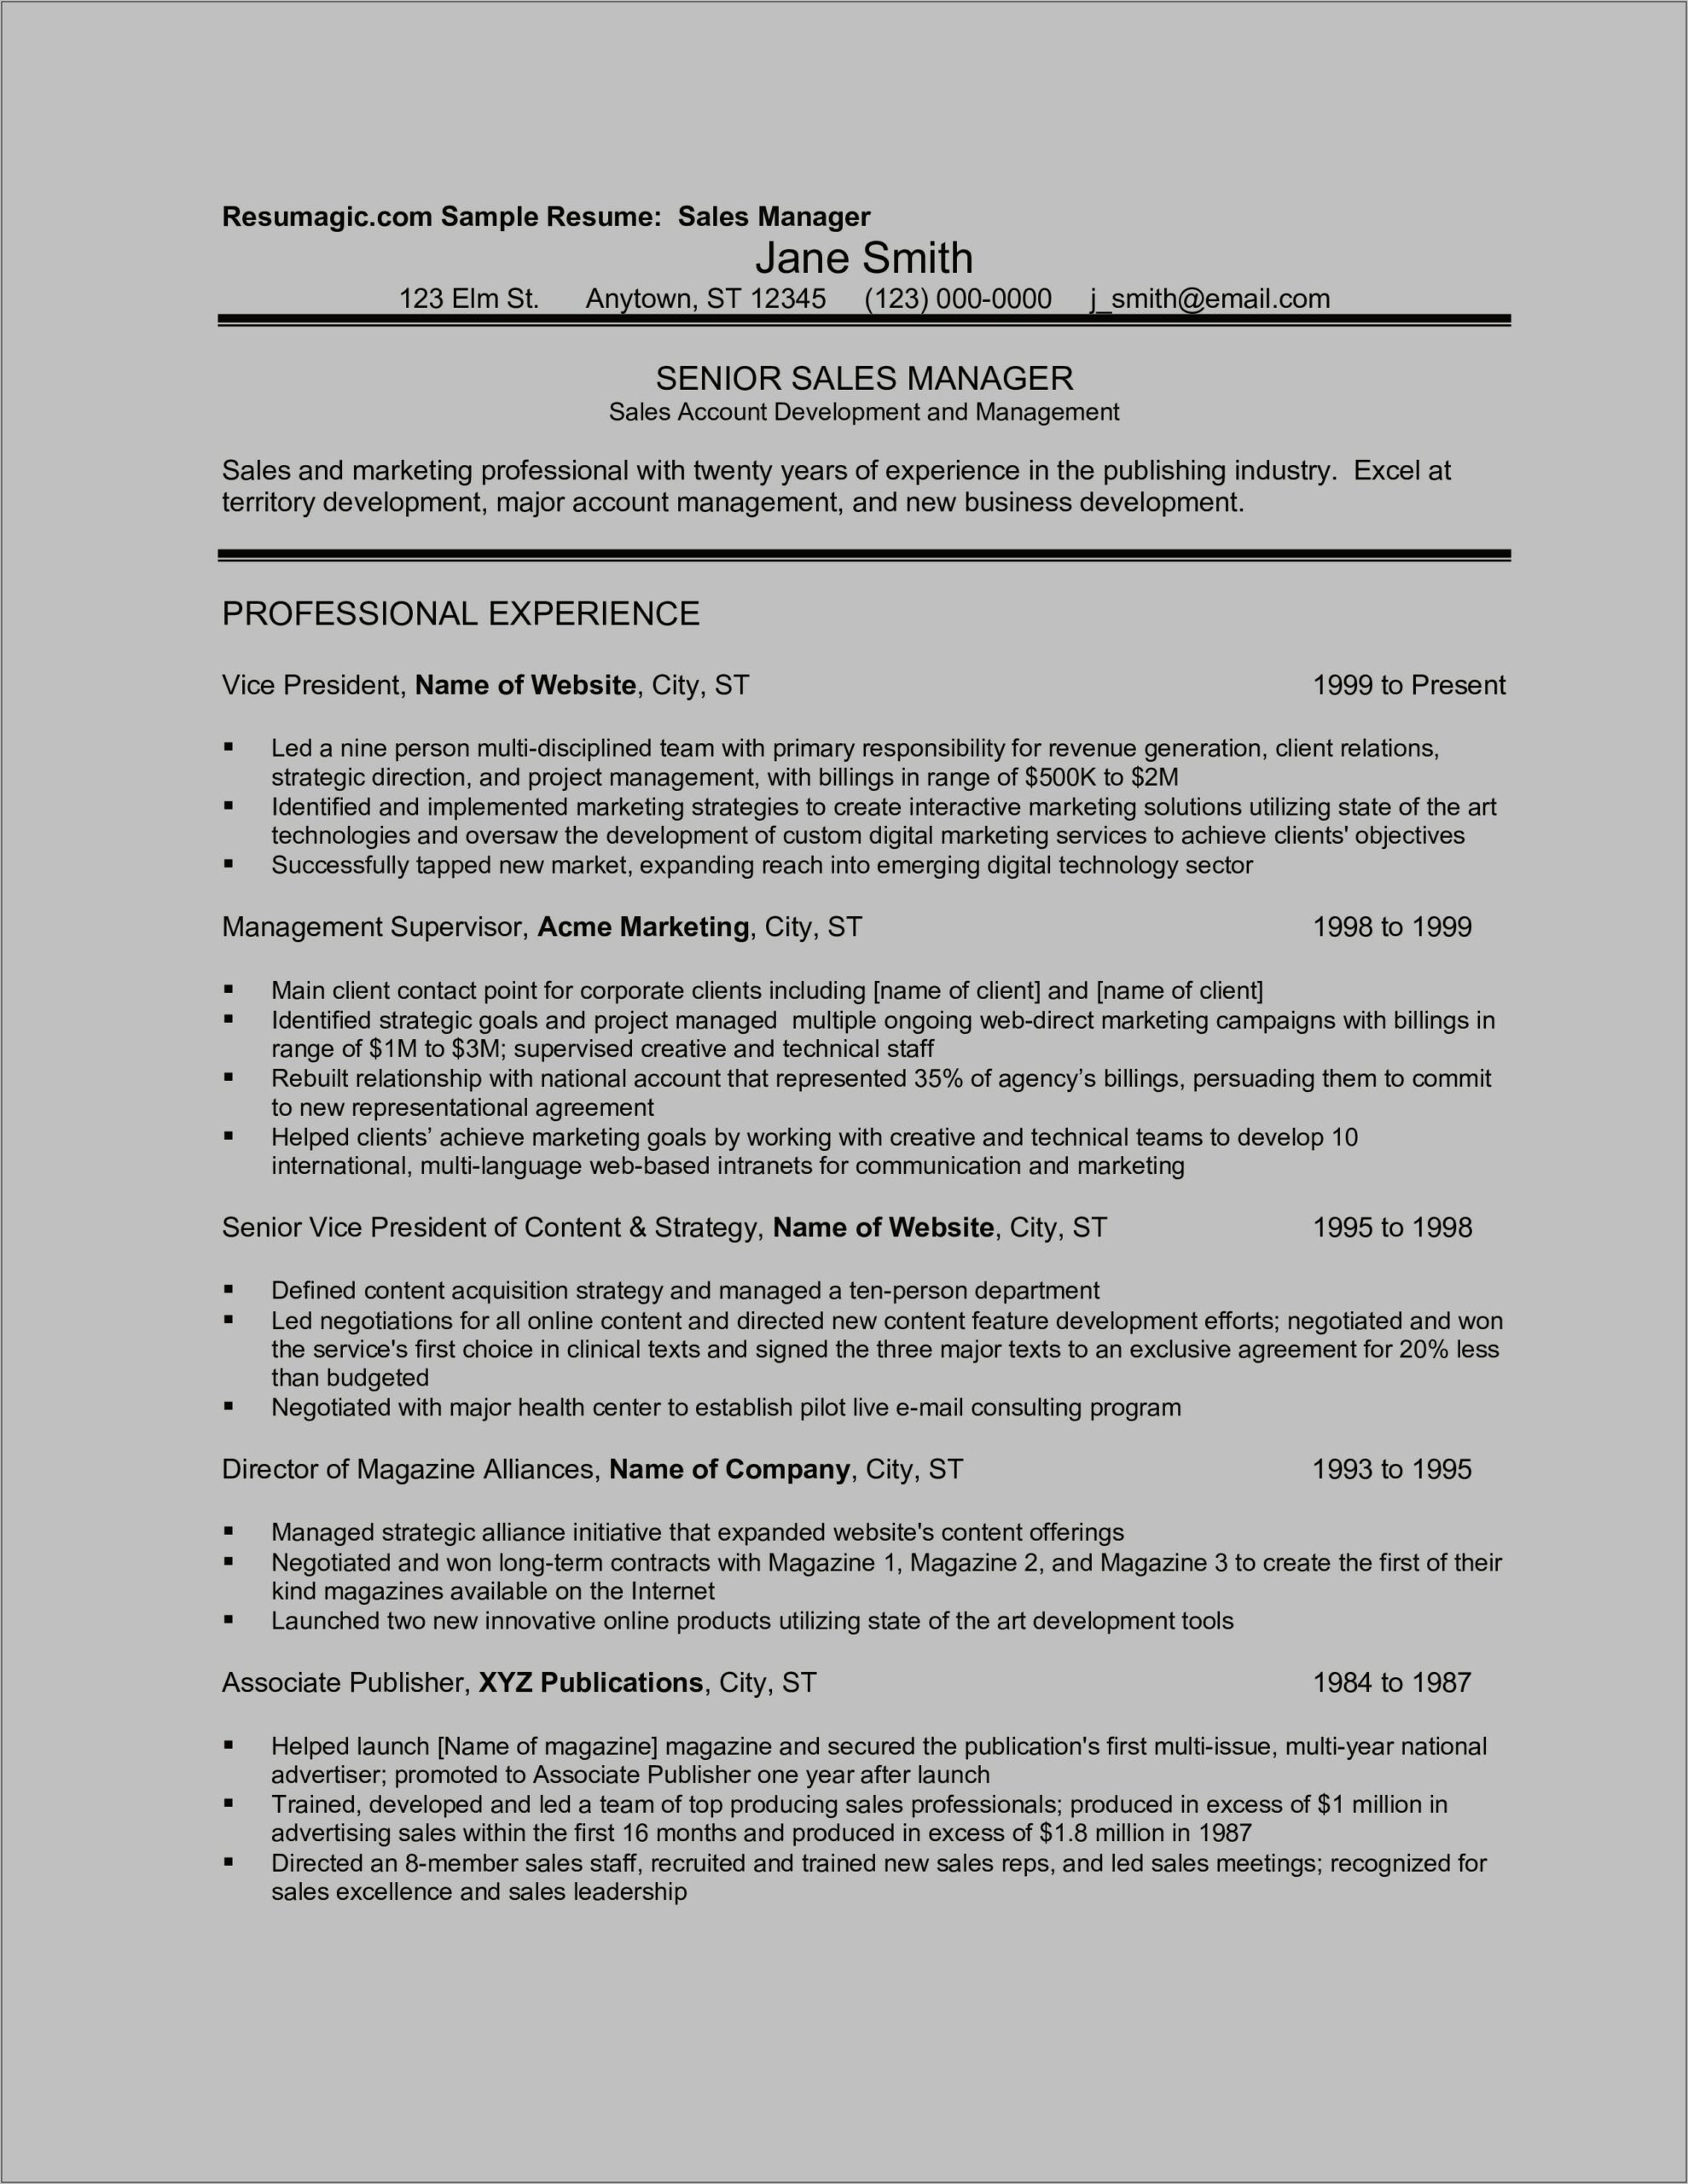 Area Sales Manager Resume Responsibilities